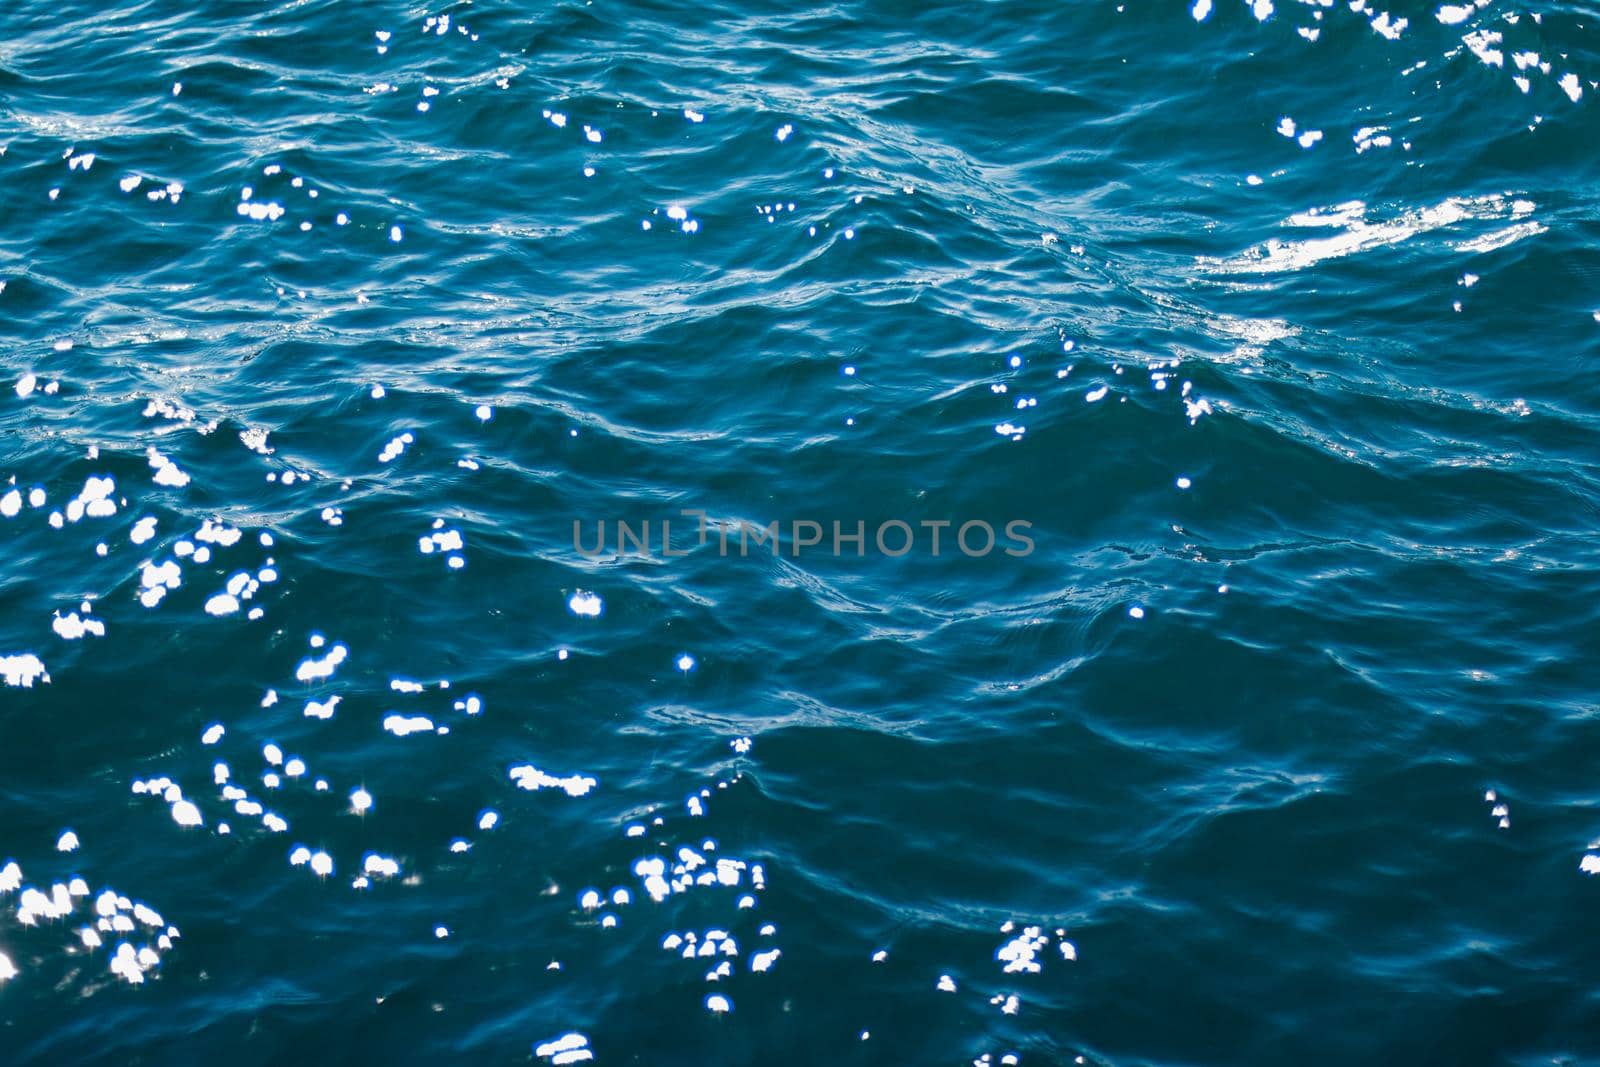 Deep blue sea water texture, dark ocean waves background as nature and environmental design concept